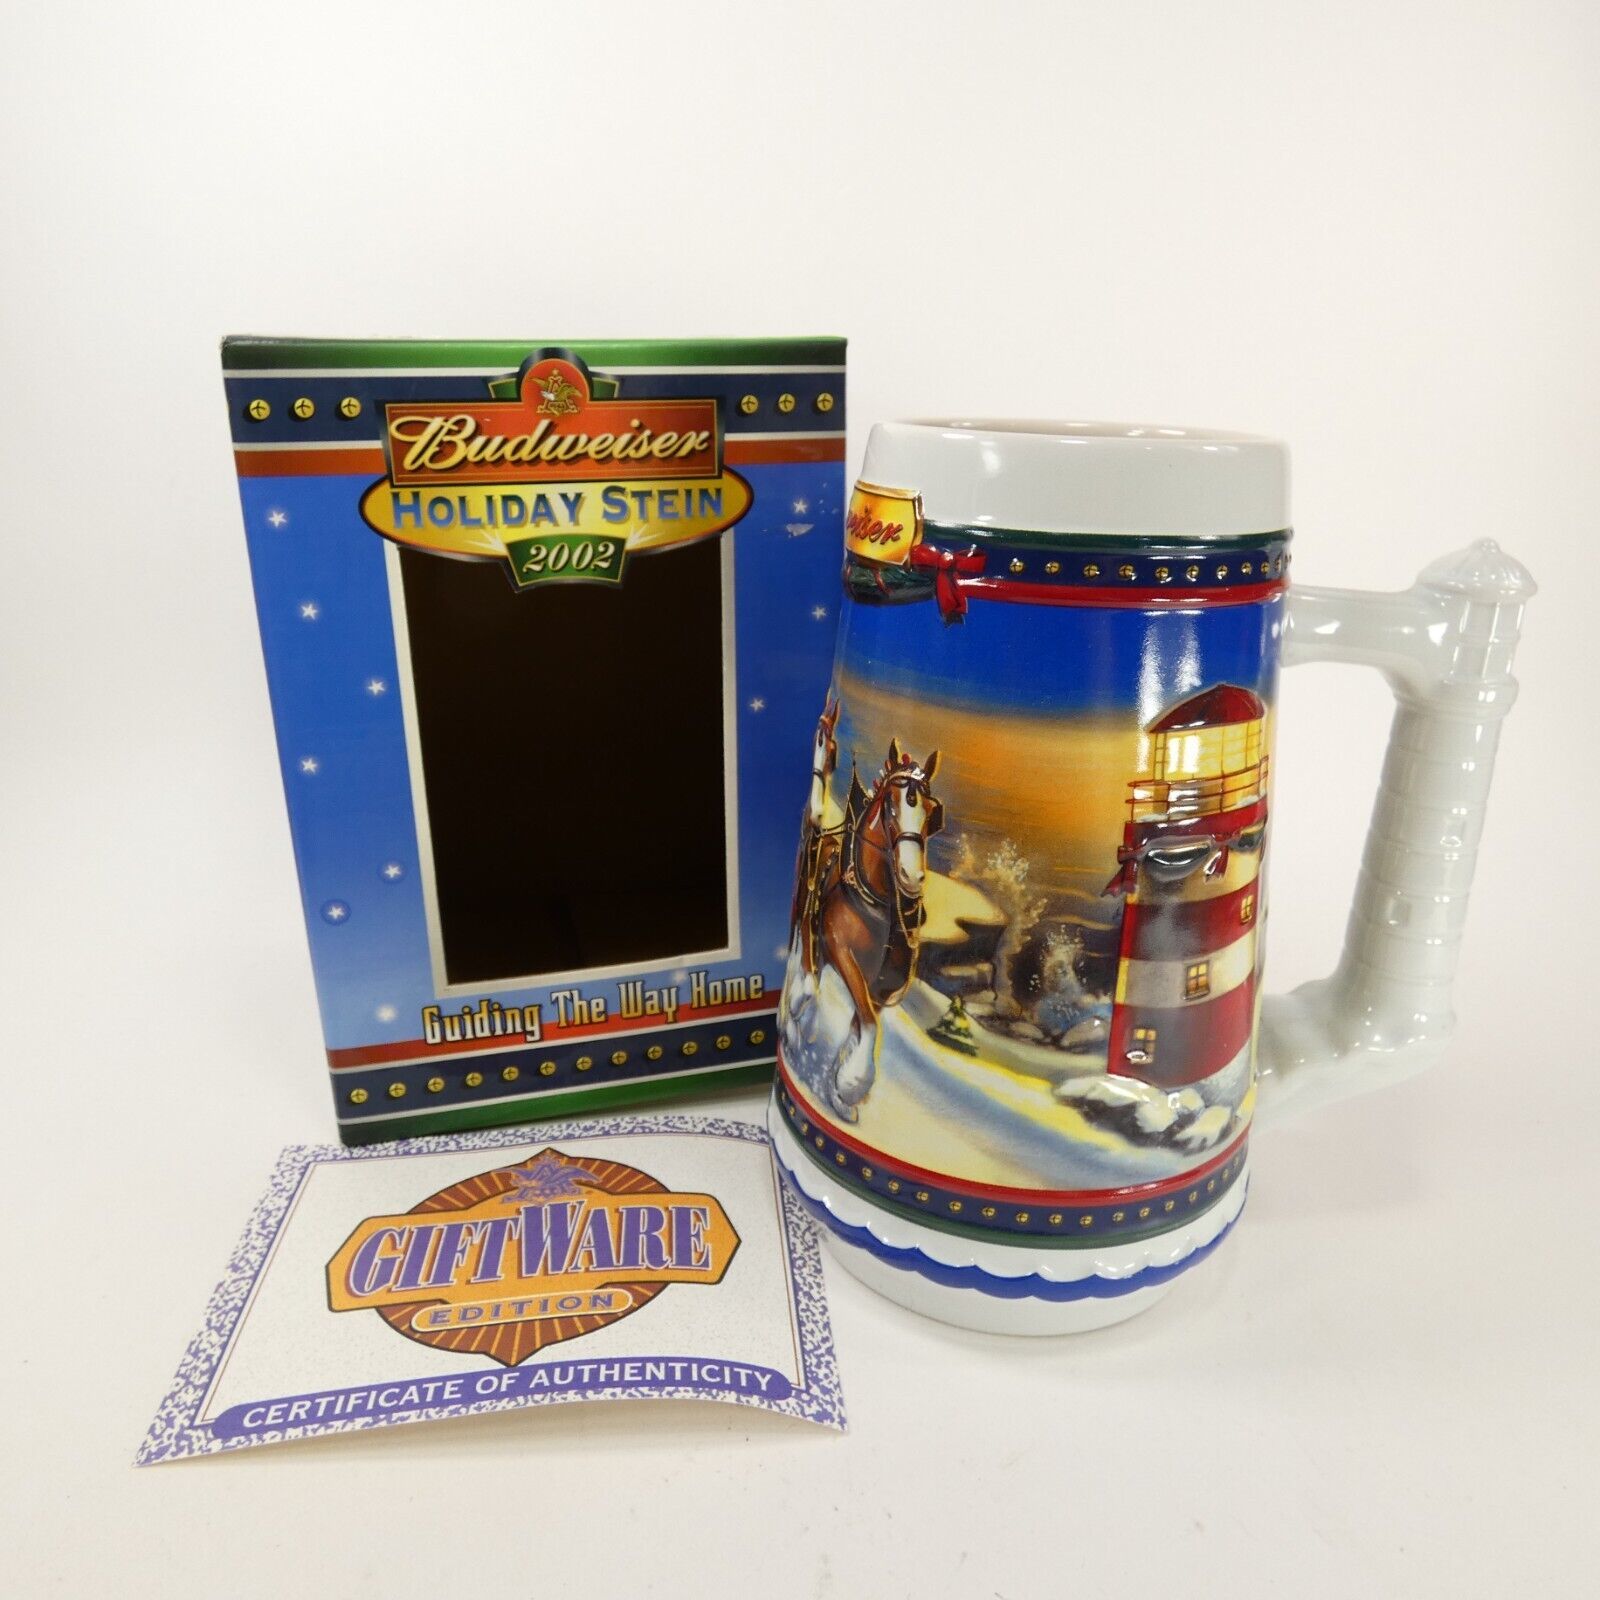 Primary image for Budweiser 2002 Guiding The Way Home Holiday Bear Stein Box & COA CS528 ZXKJW